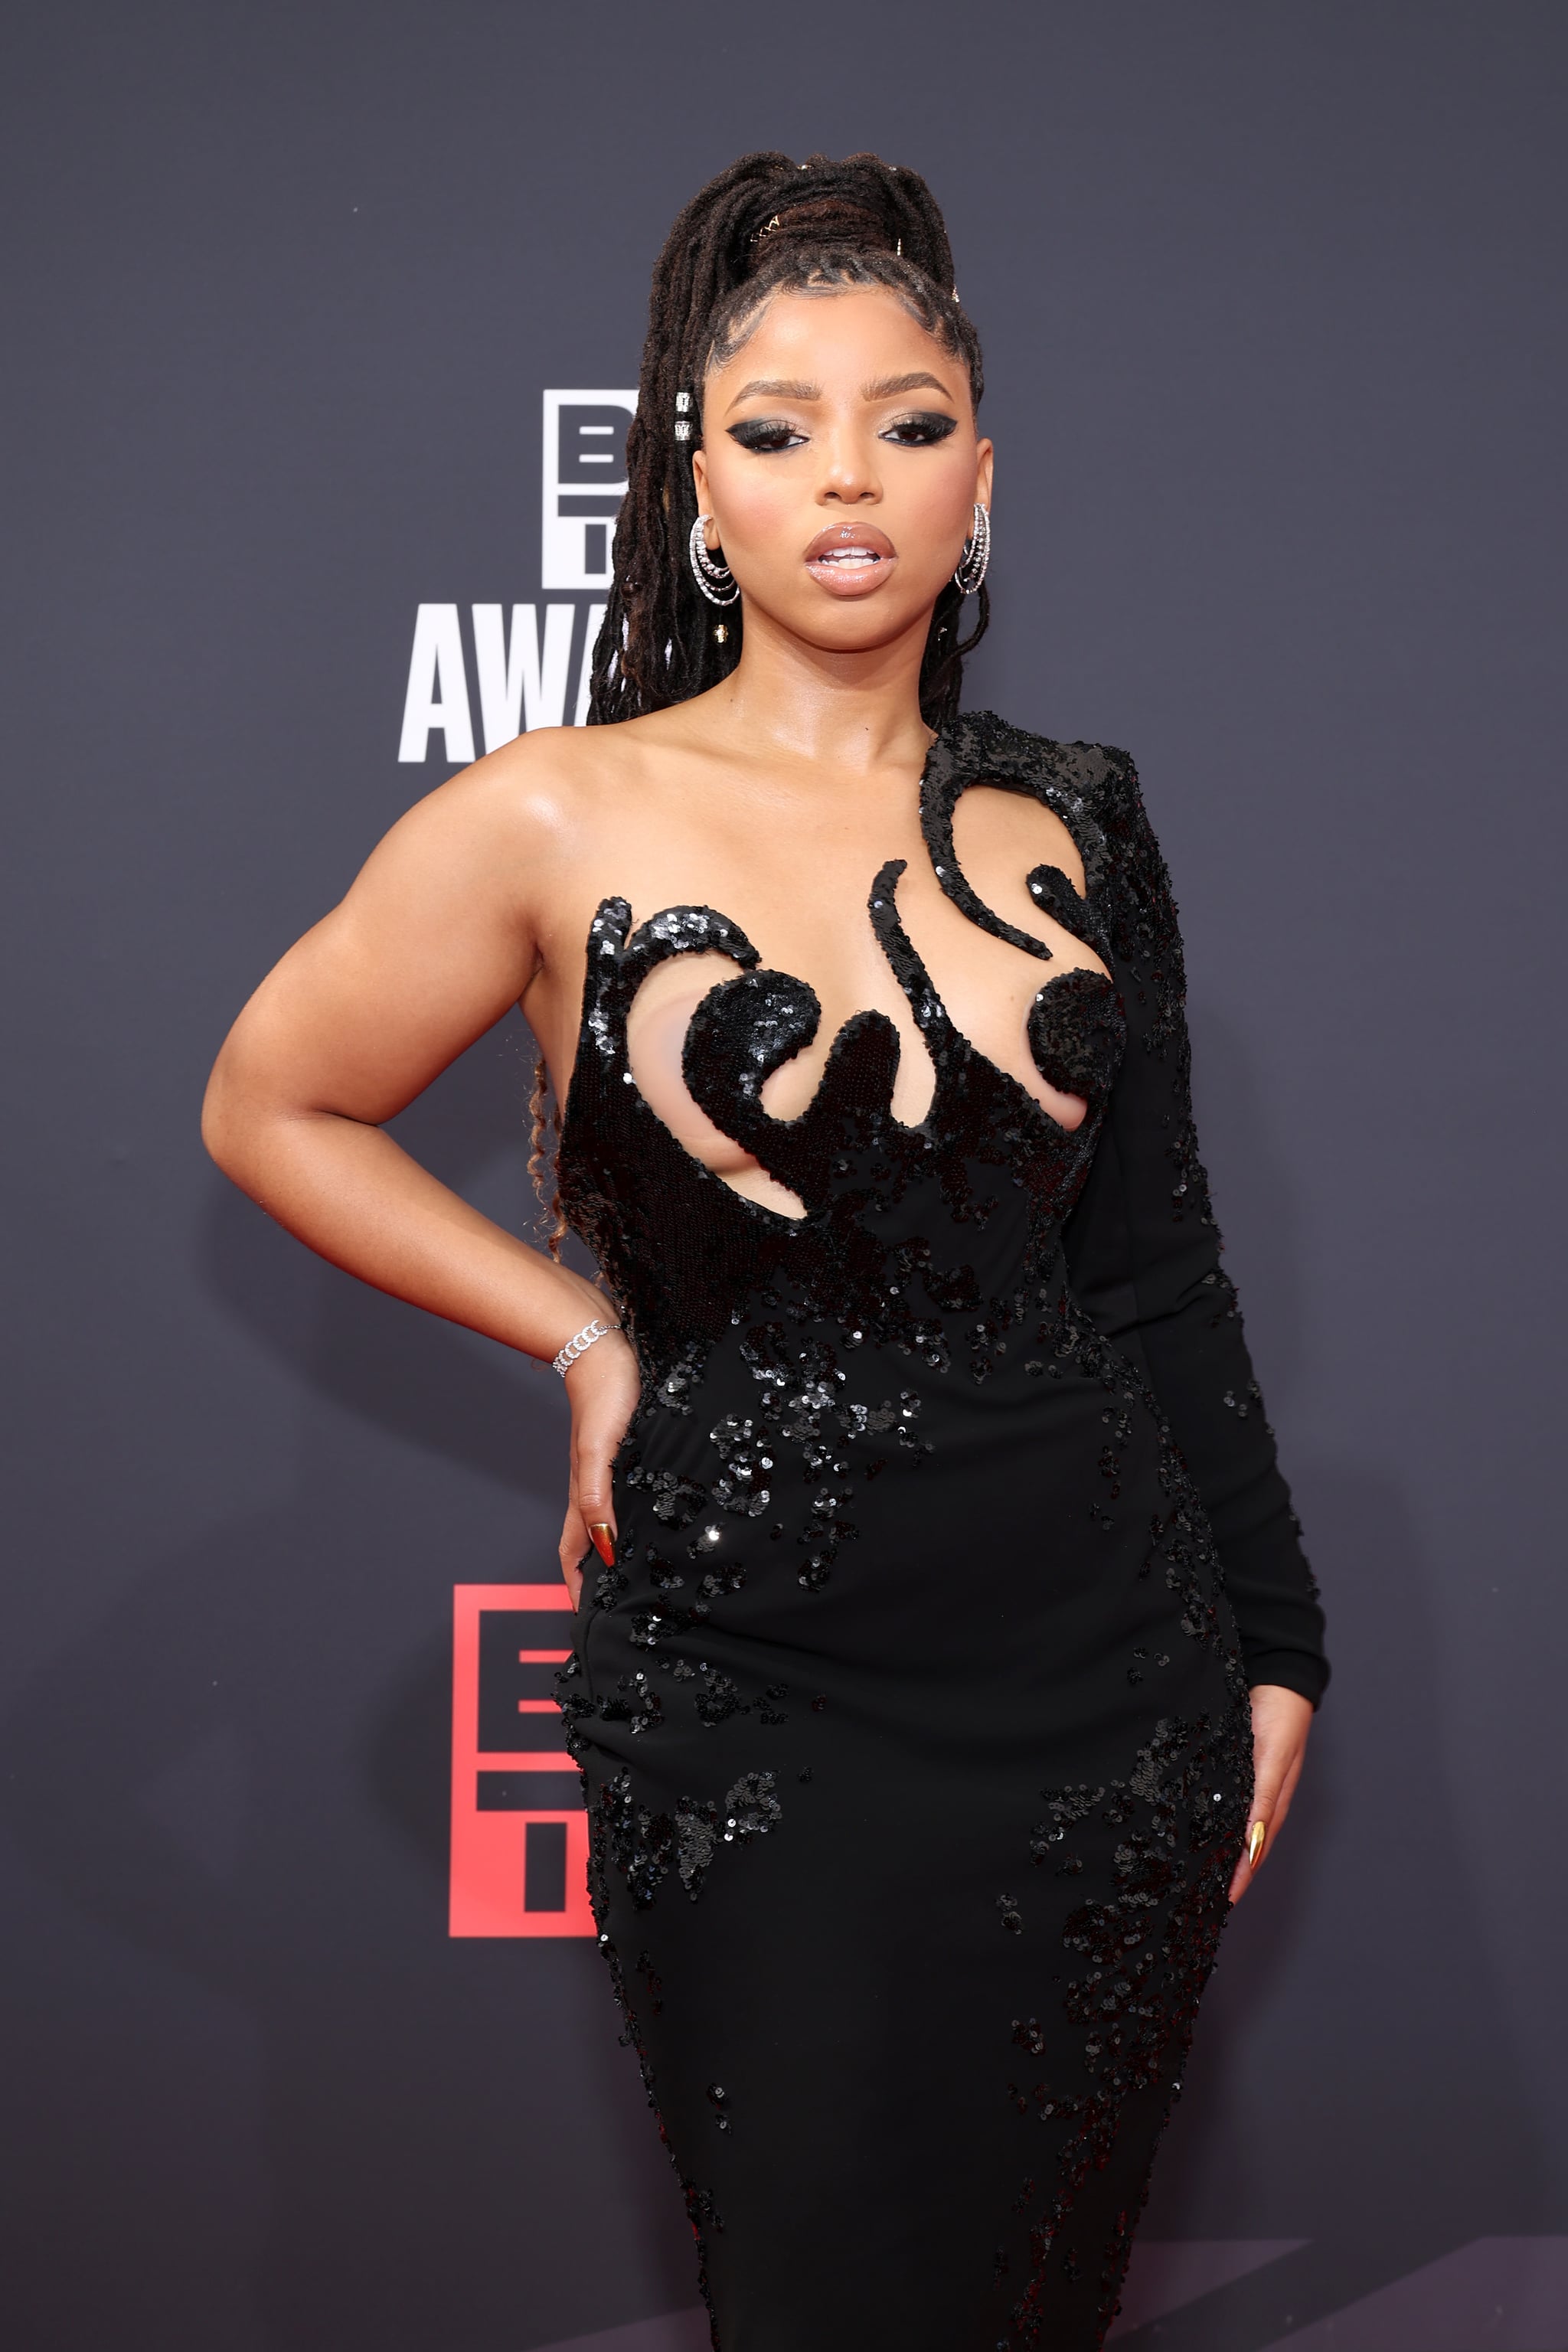 LOS ANGELES, CALIFORNIA - JUNE 26: Chloe attends the 2022 BET Awards at Microsoft Theatre on June 26, 2022 in Los Angeles, California. (Photo by Amy Sussman/Getty Images,)